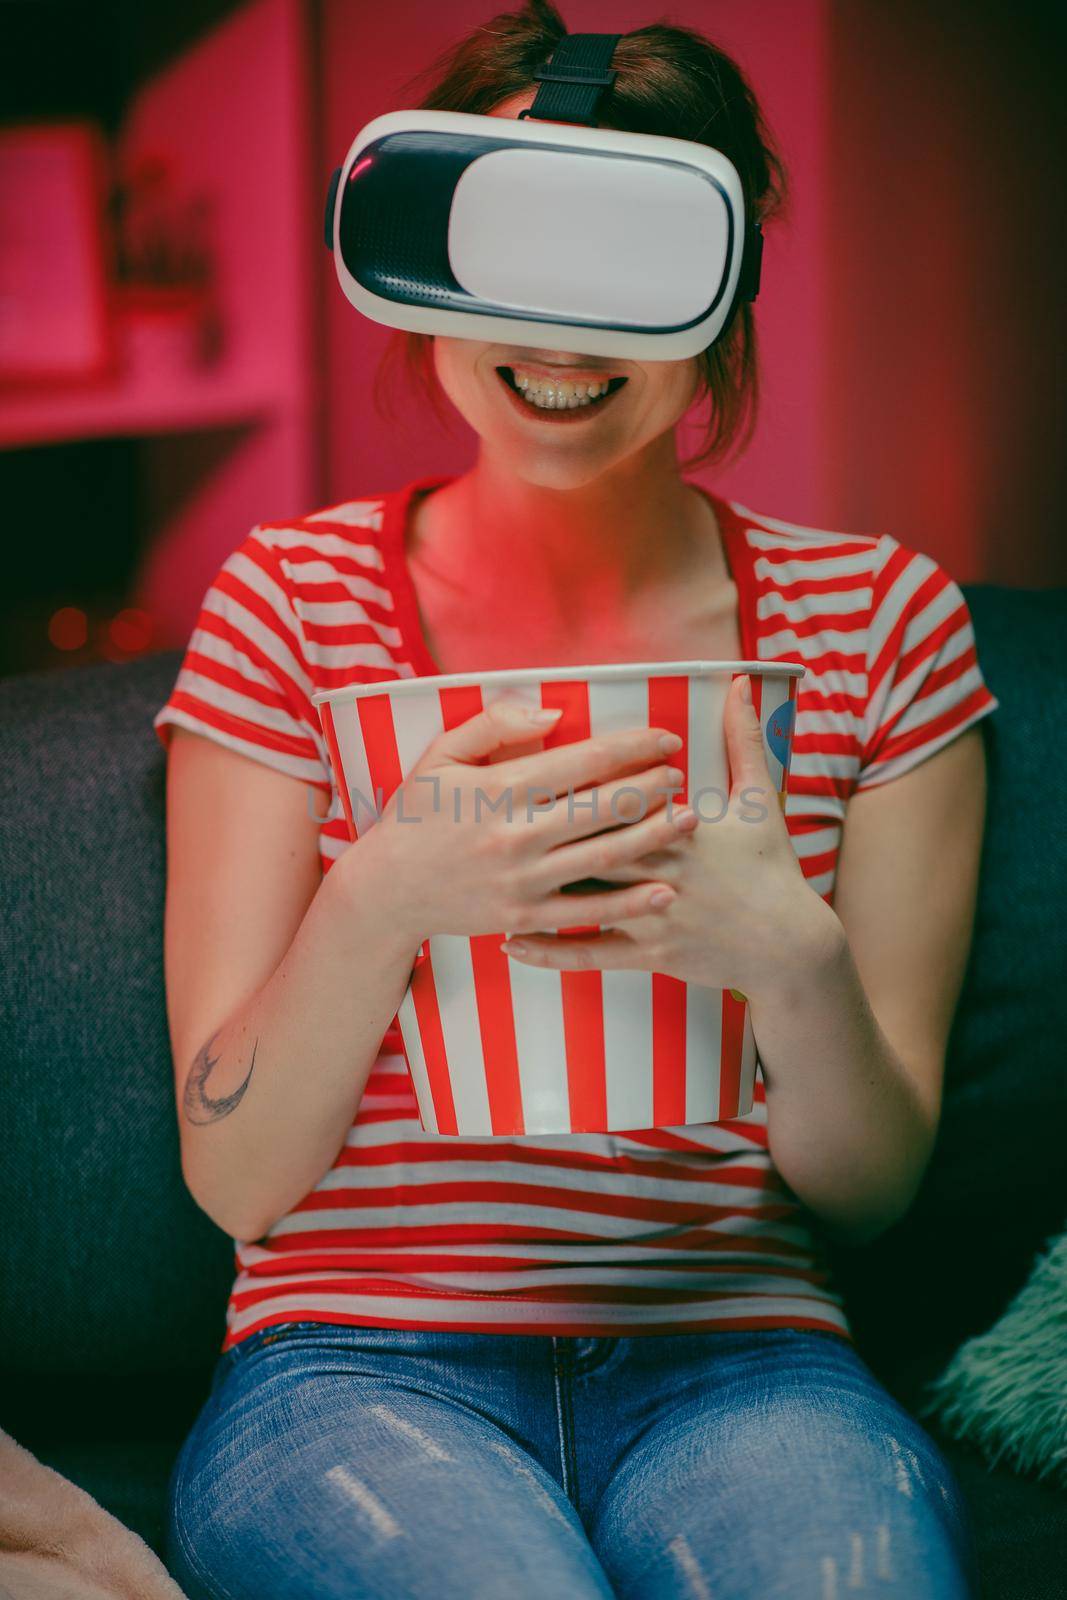 Woman wear VR headset and watch movie with popcorn at night. American woman sitting on the sofa in the VR glasses and watching something while eating popcorn. Indoor